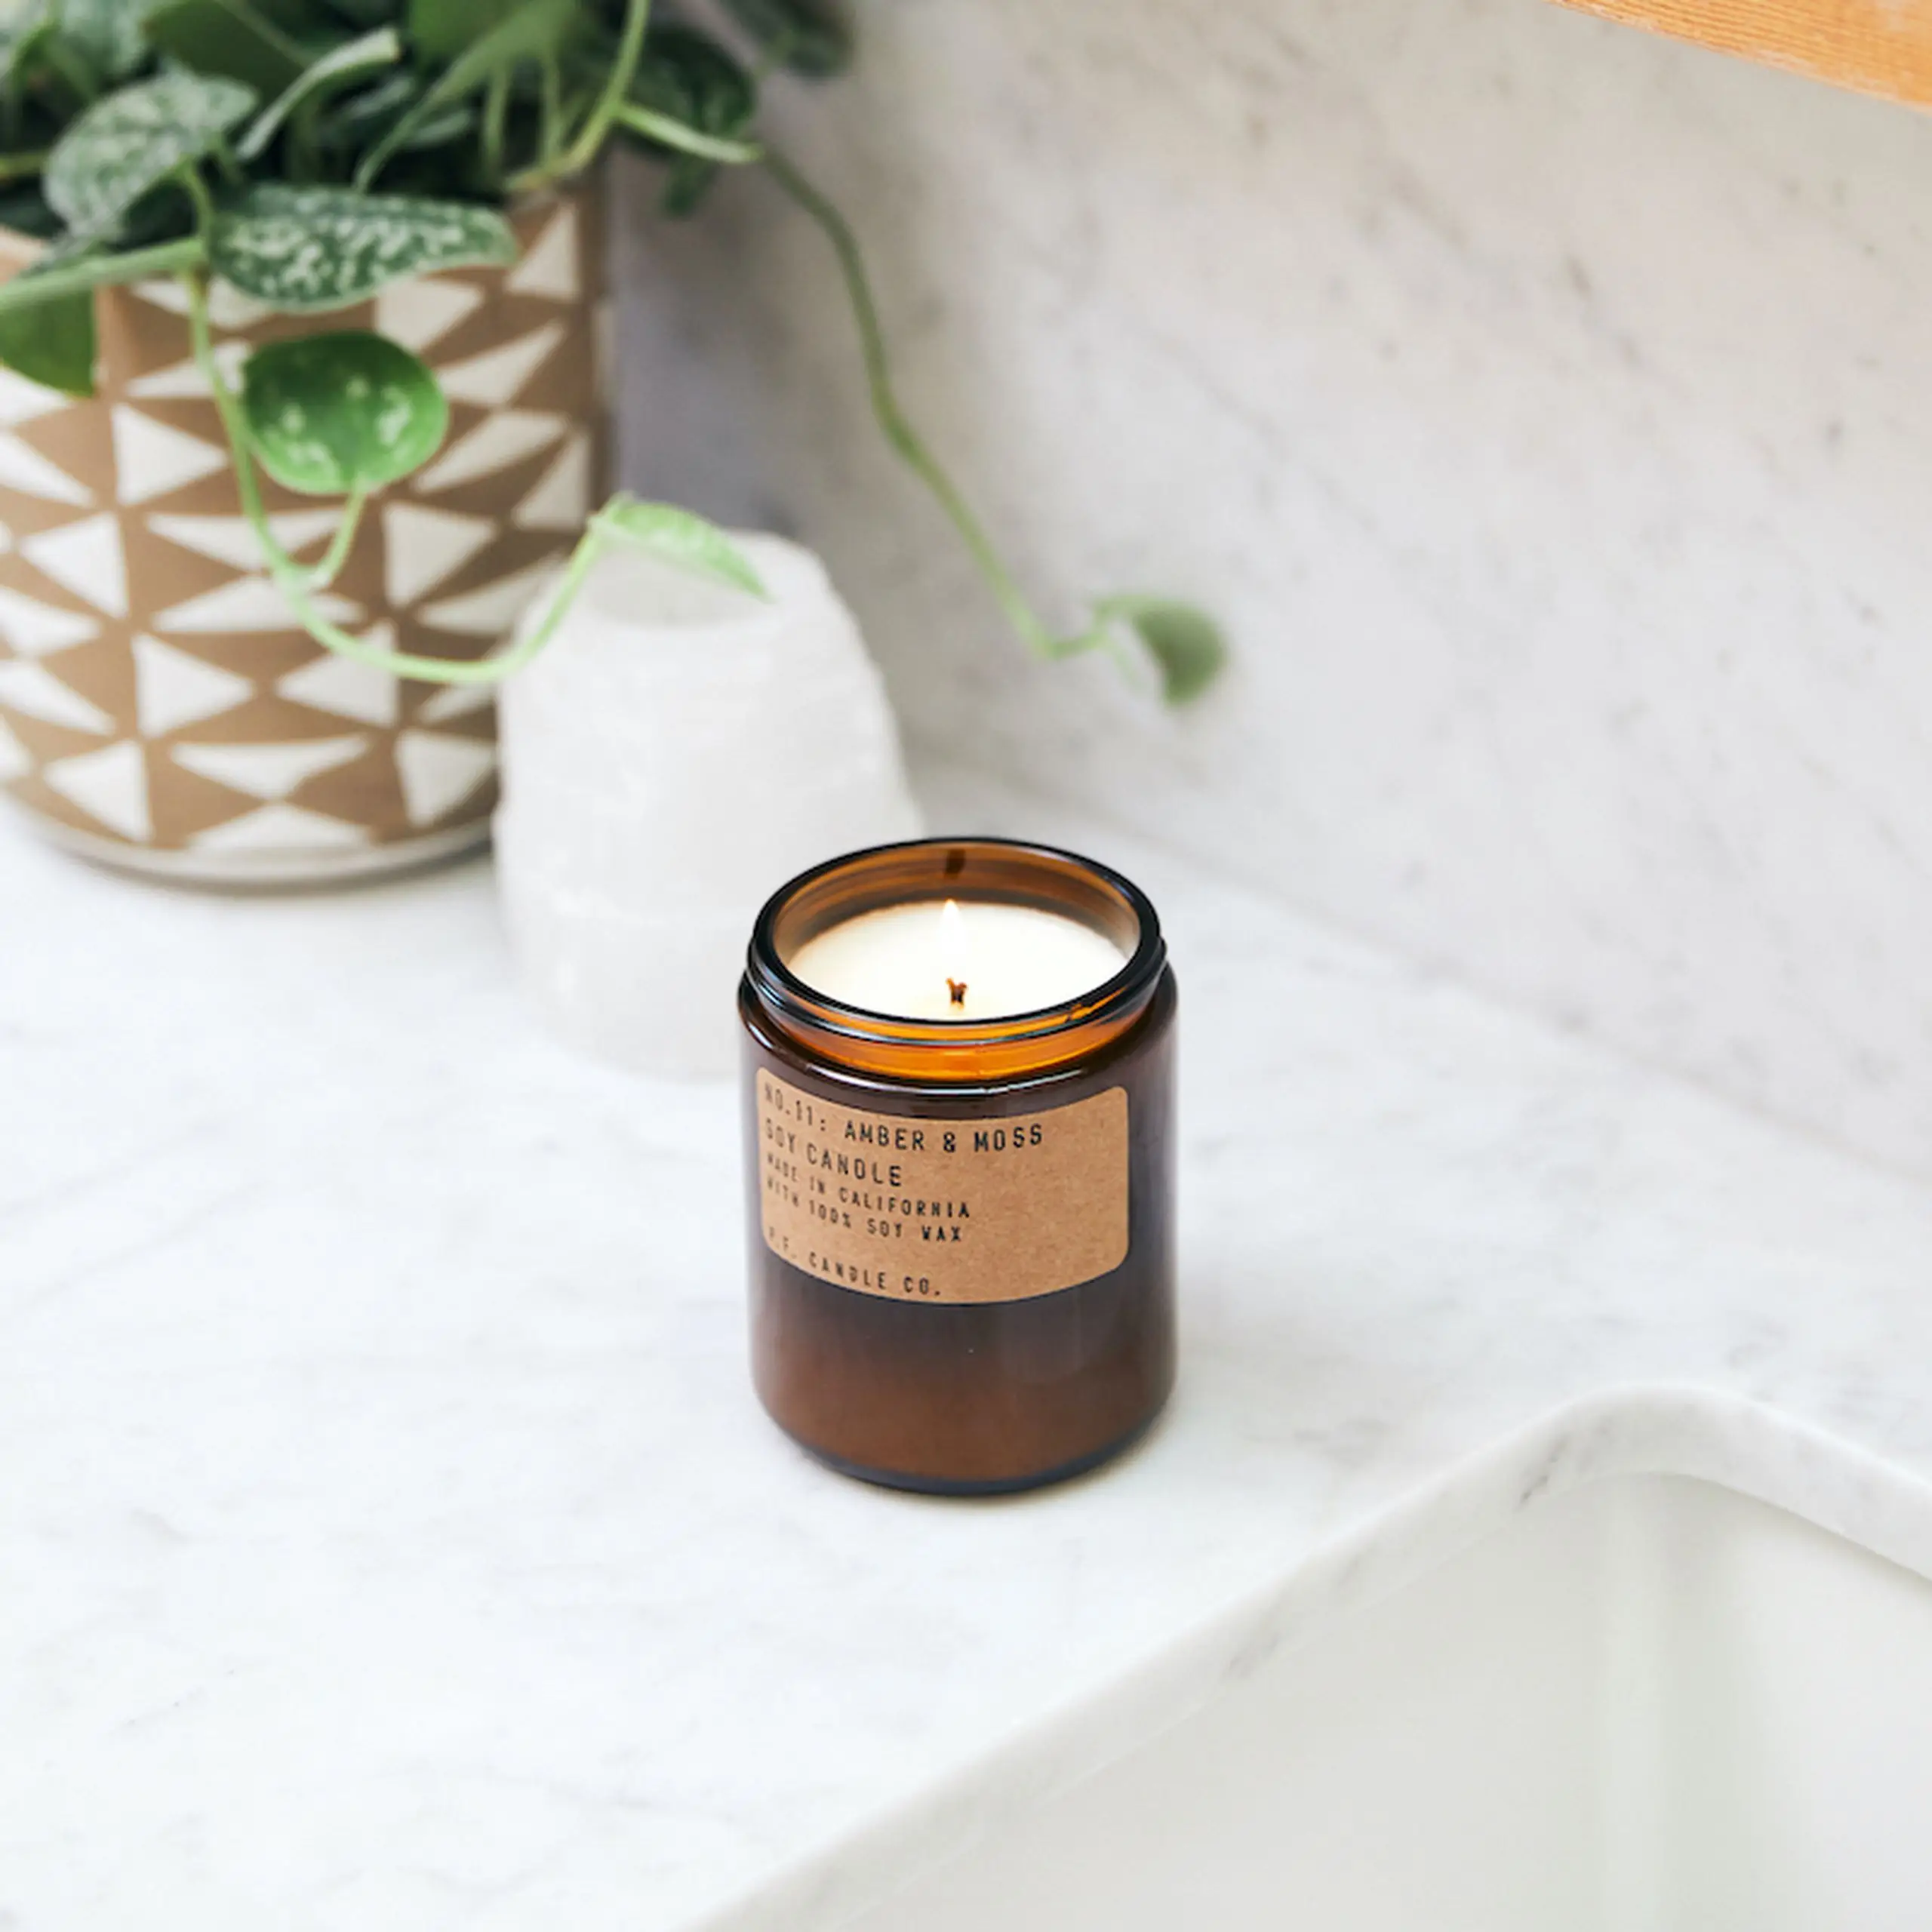 PF Candle Co No 11 Amber Moss 72 oz Soy Candle 2